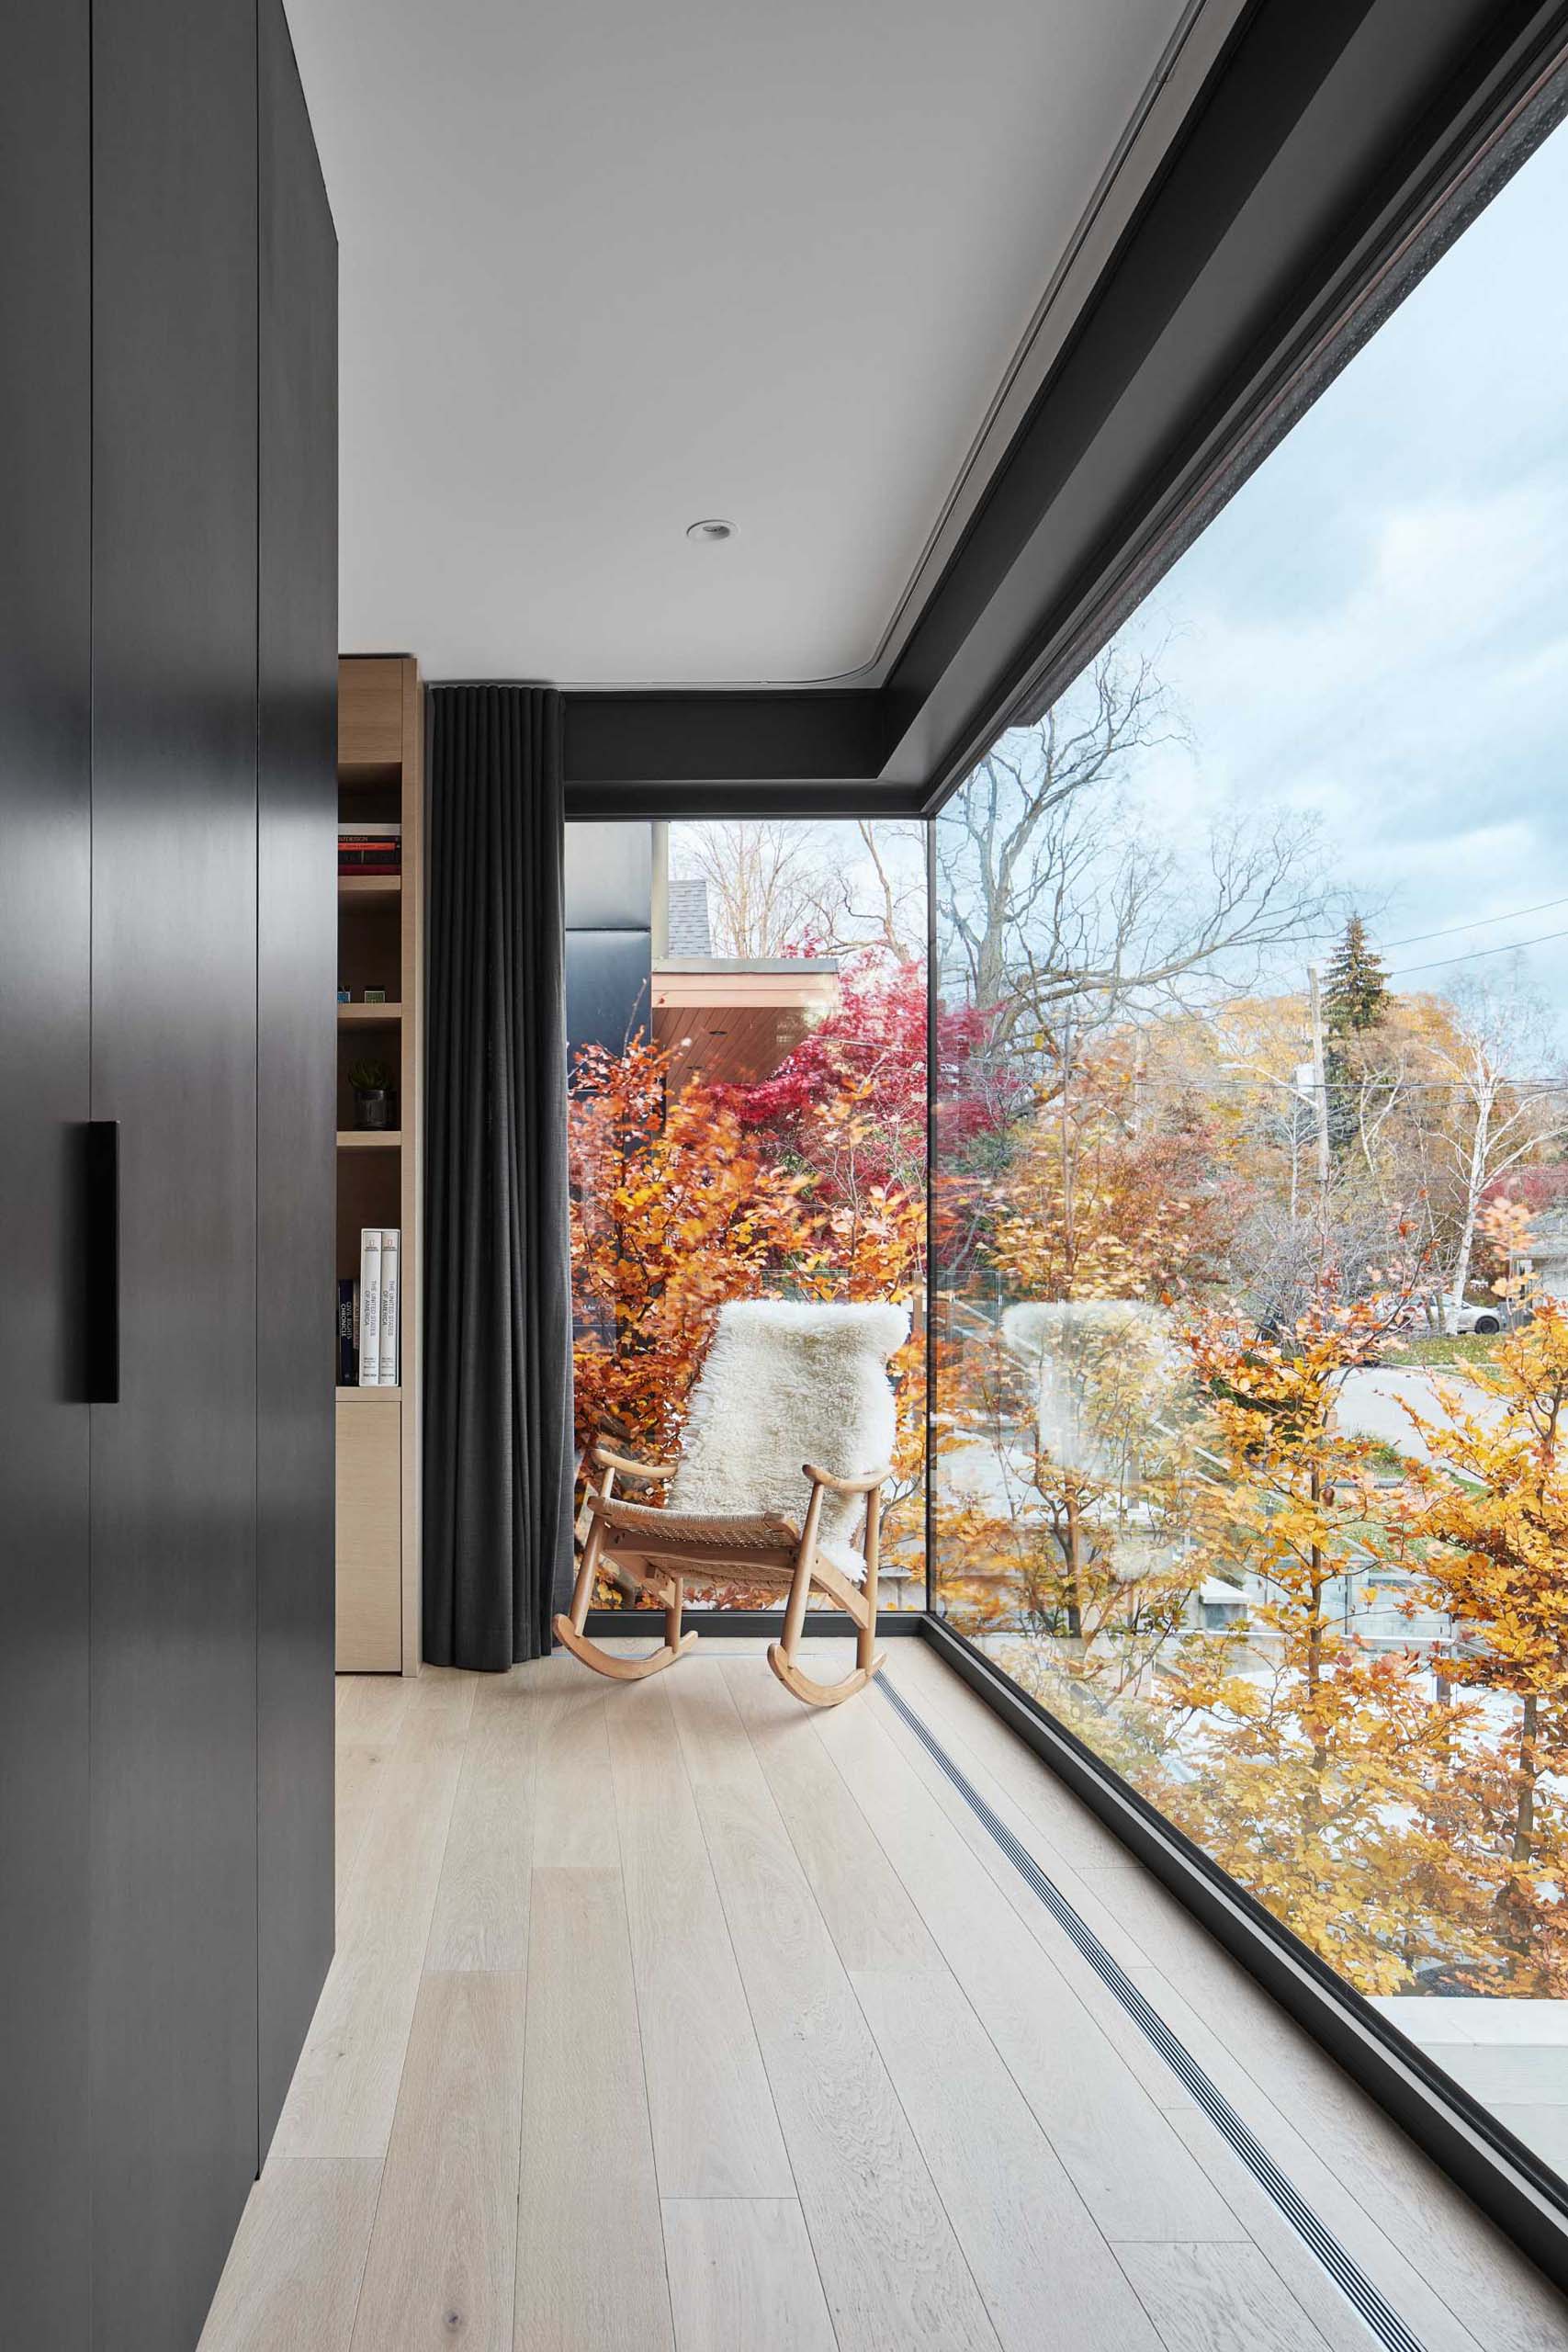 A large floor-to-ceiling corner window fills the space with natural light and provides views of the street.